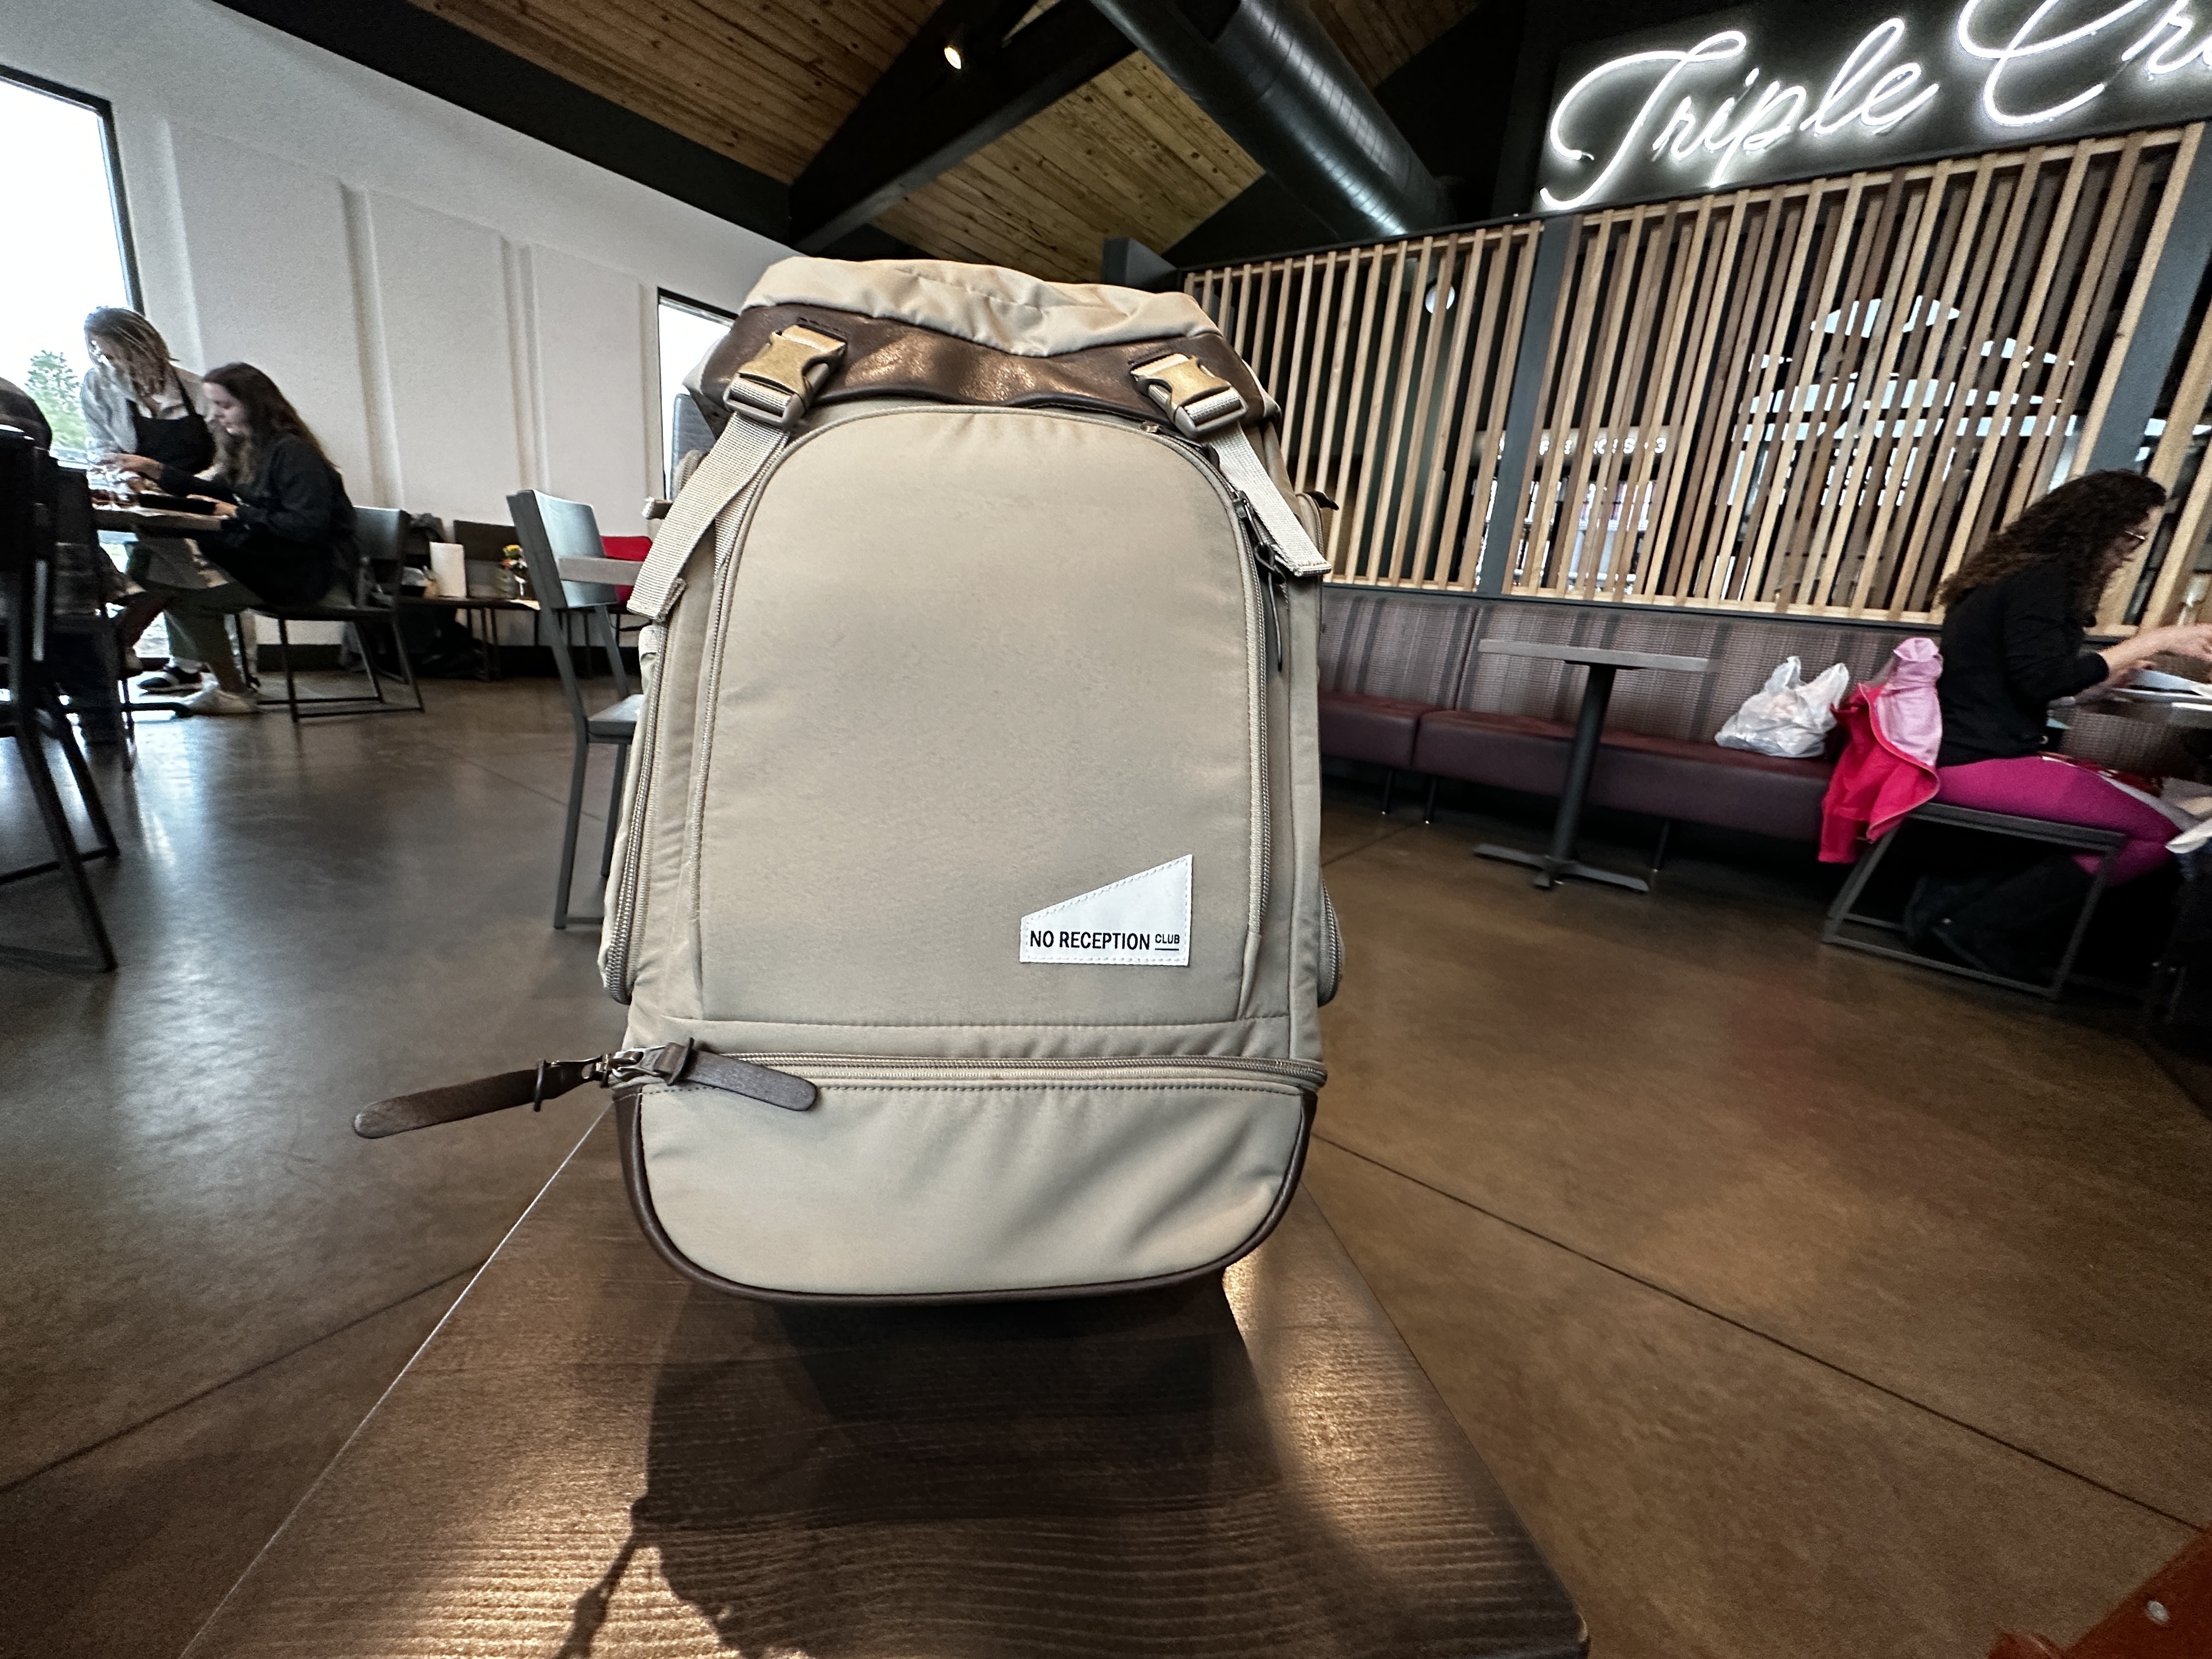 The Getaway diaper bag sits in a brewery.